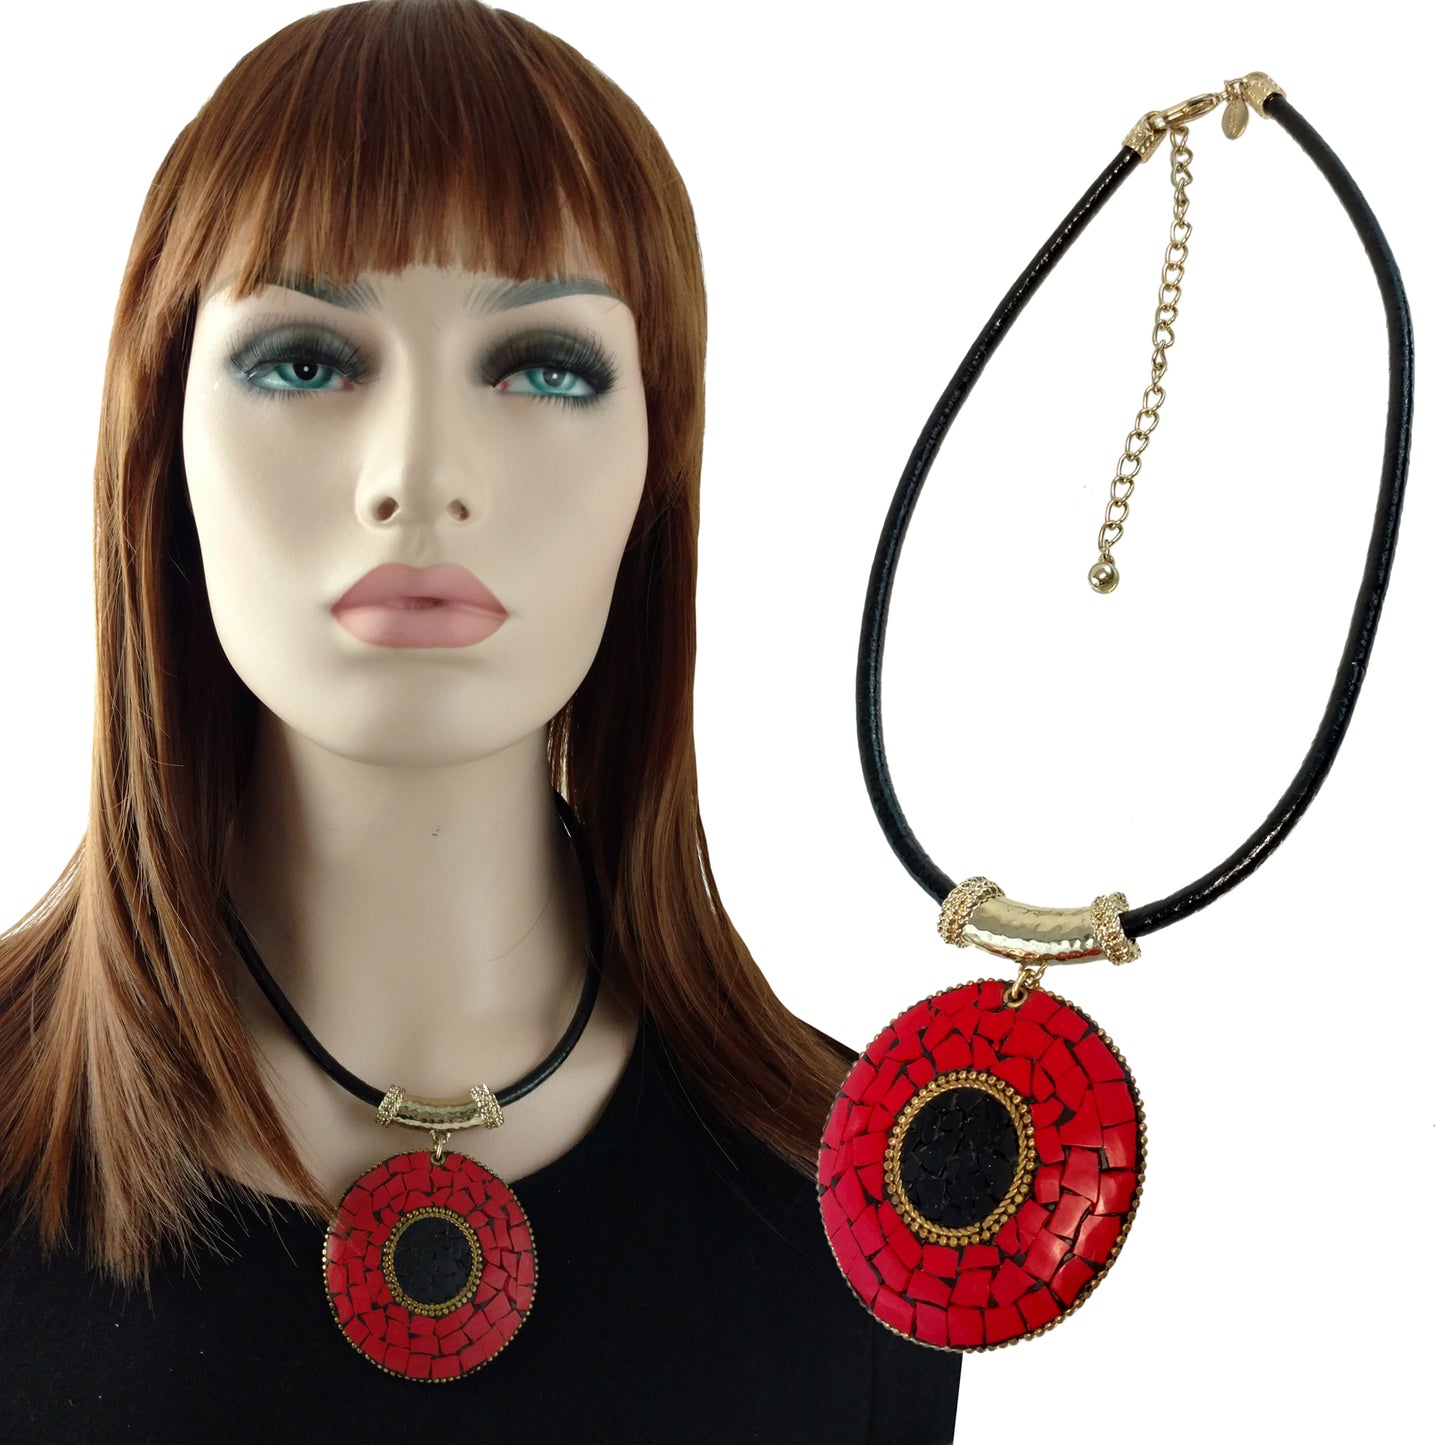 Chicos Mosiac Red and Black Asian Inspired Statement Pendant Necklace